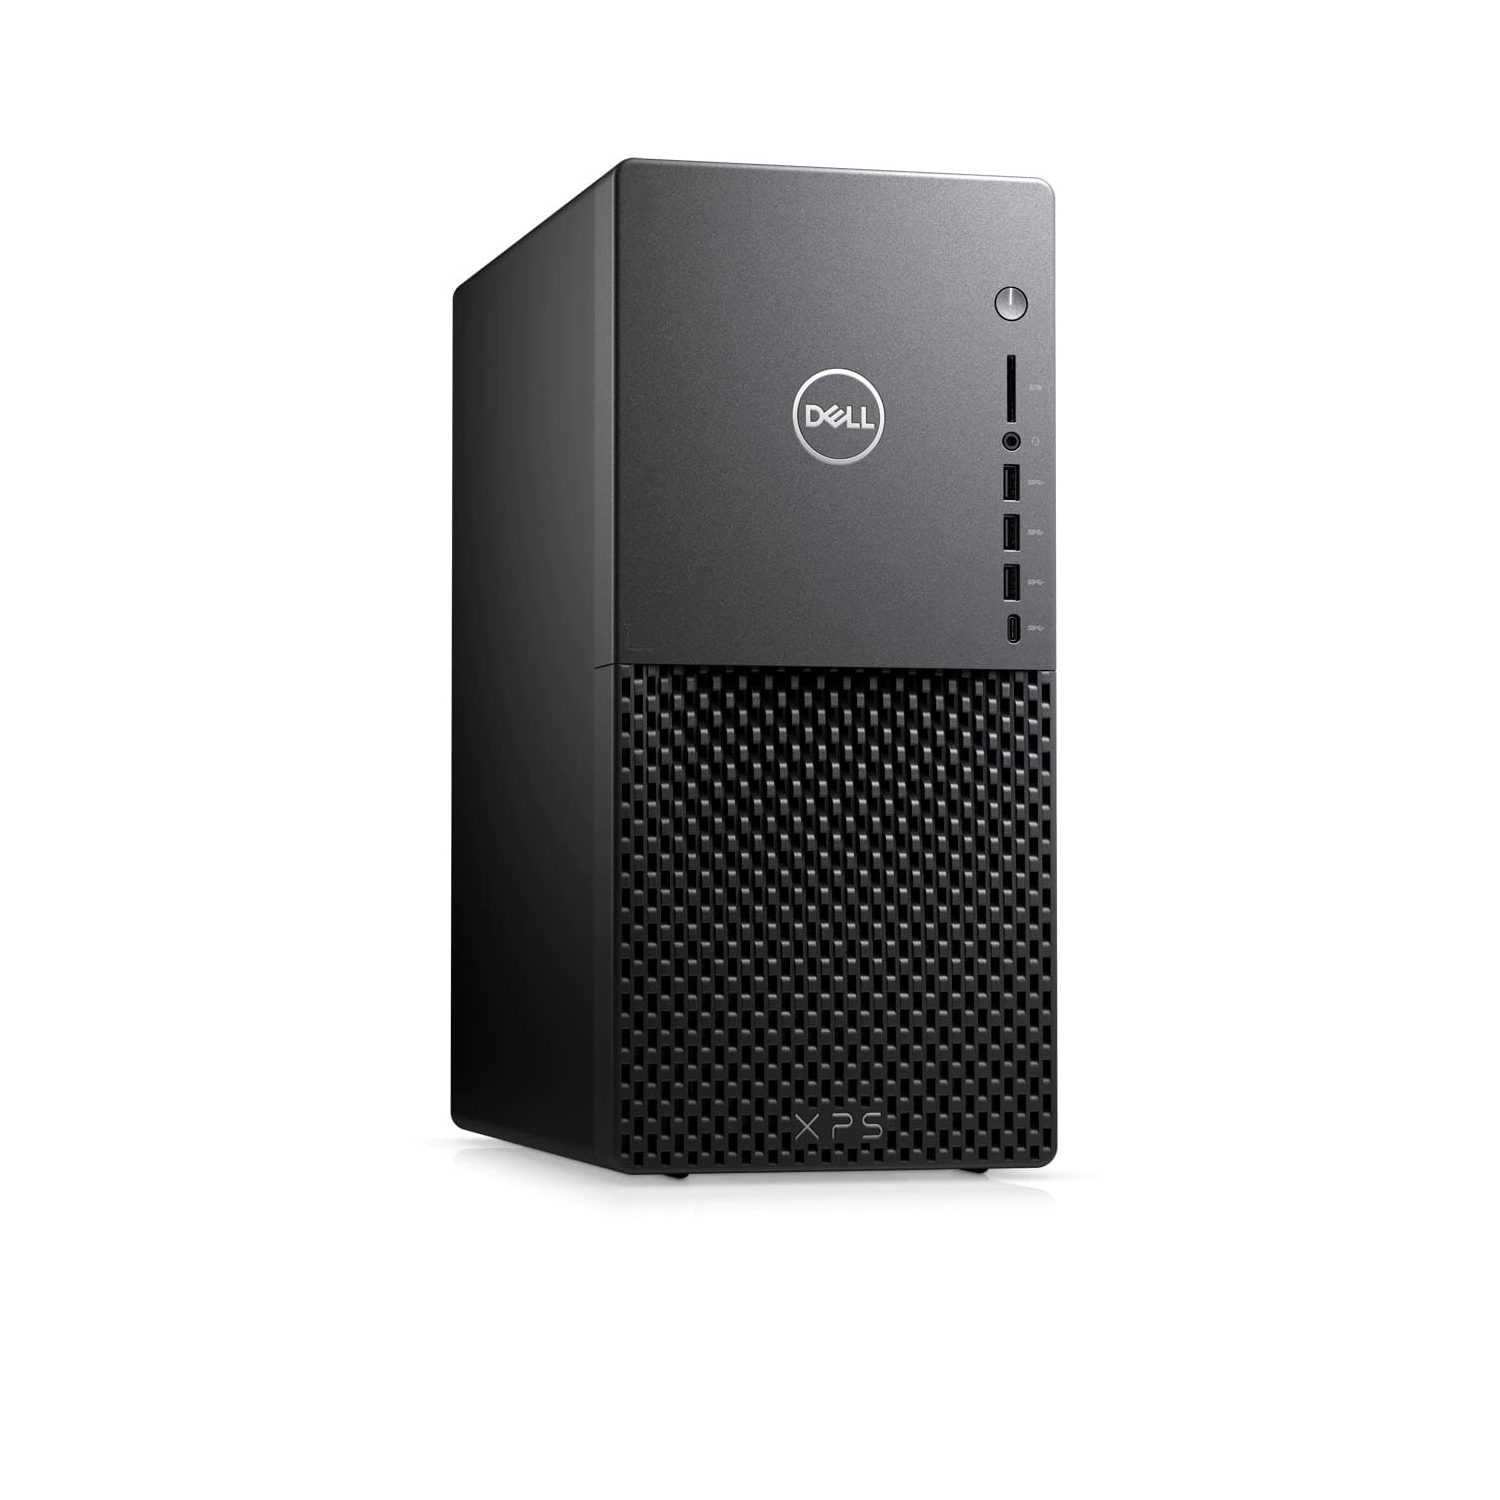 Refurbished (Excellent) - Dell XPS 8940 Desktop (2020) | Core i7 - 2TB HDD + 512GB SSD - 16GB RAM - 2060 SUPER | 8 Cores @ 4.8 GHz - 10th Gen CPU Certified Refurbished